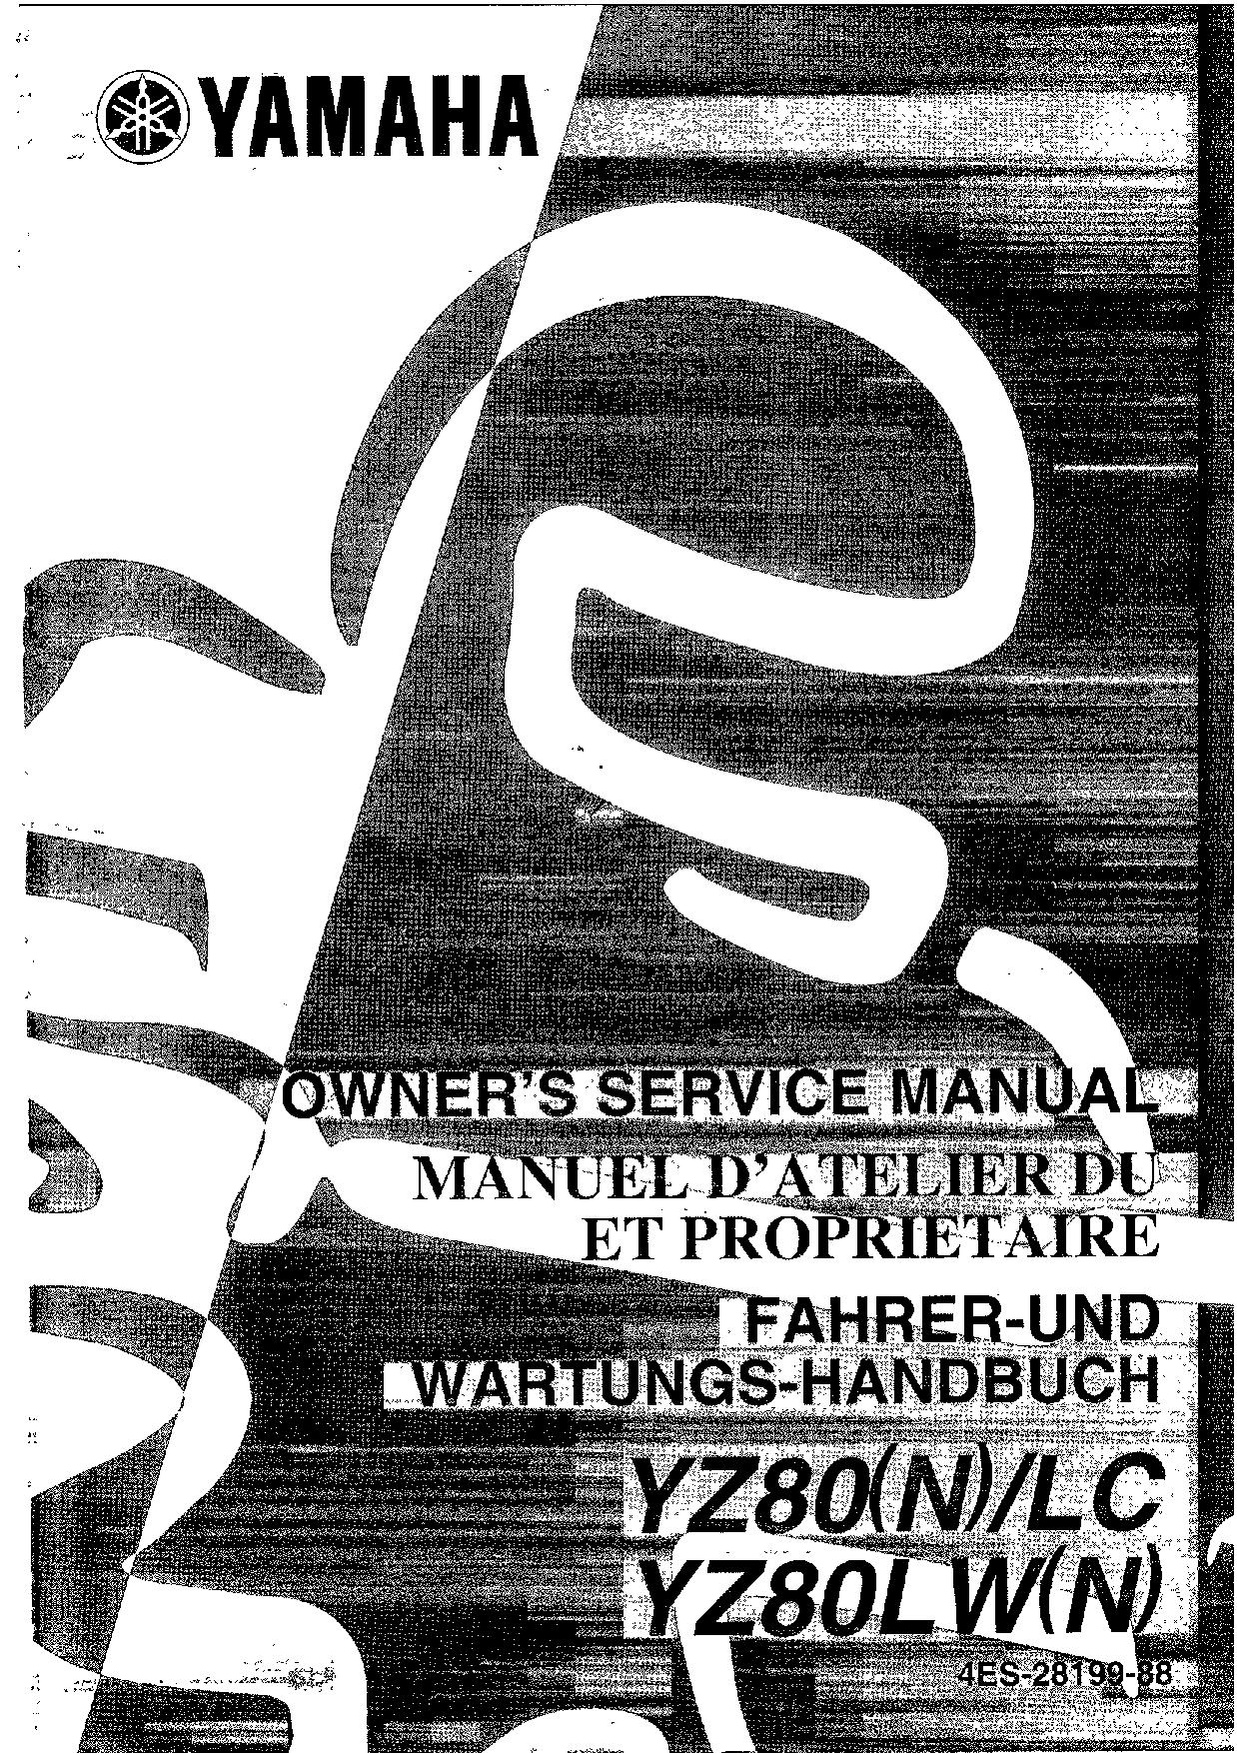 Yamaha Factory Owner's Service Manual 2001 YZ80N1 LIT11626-14-26